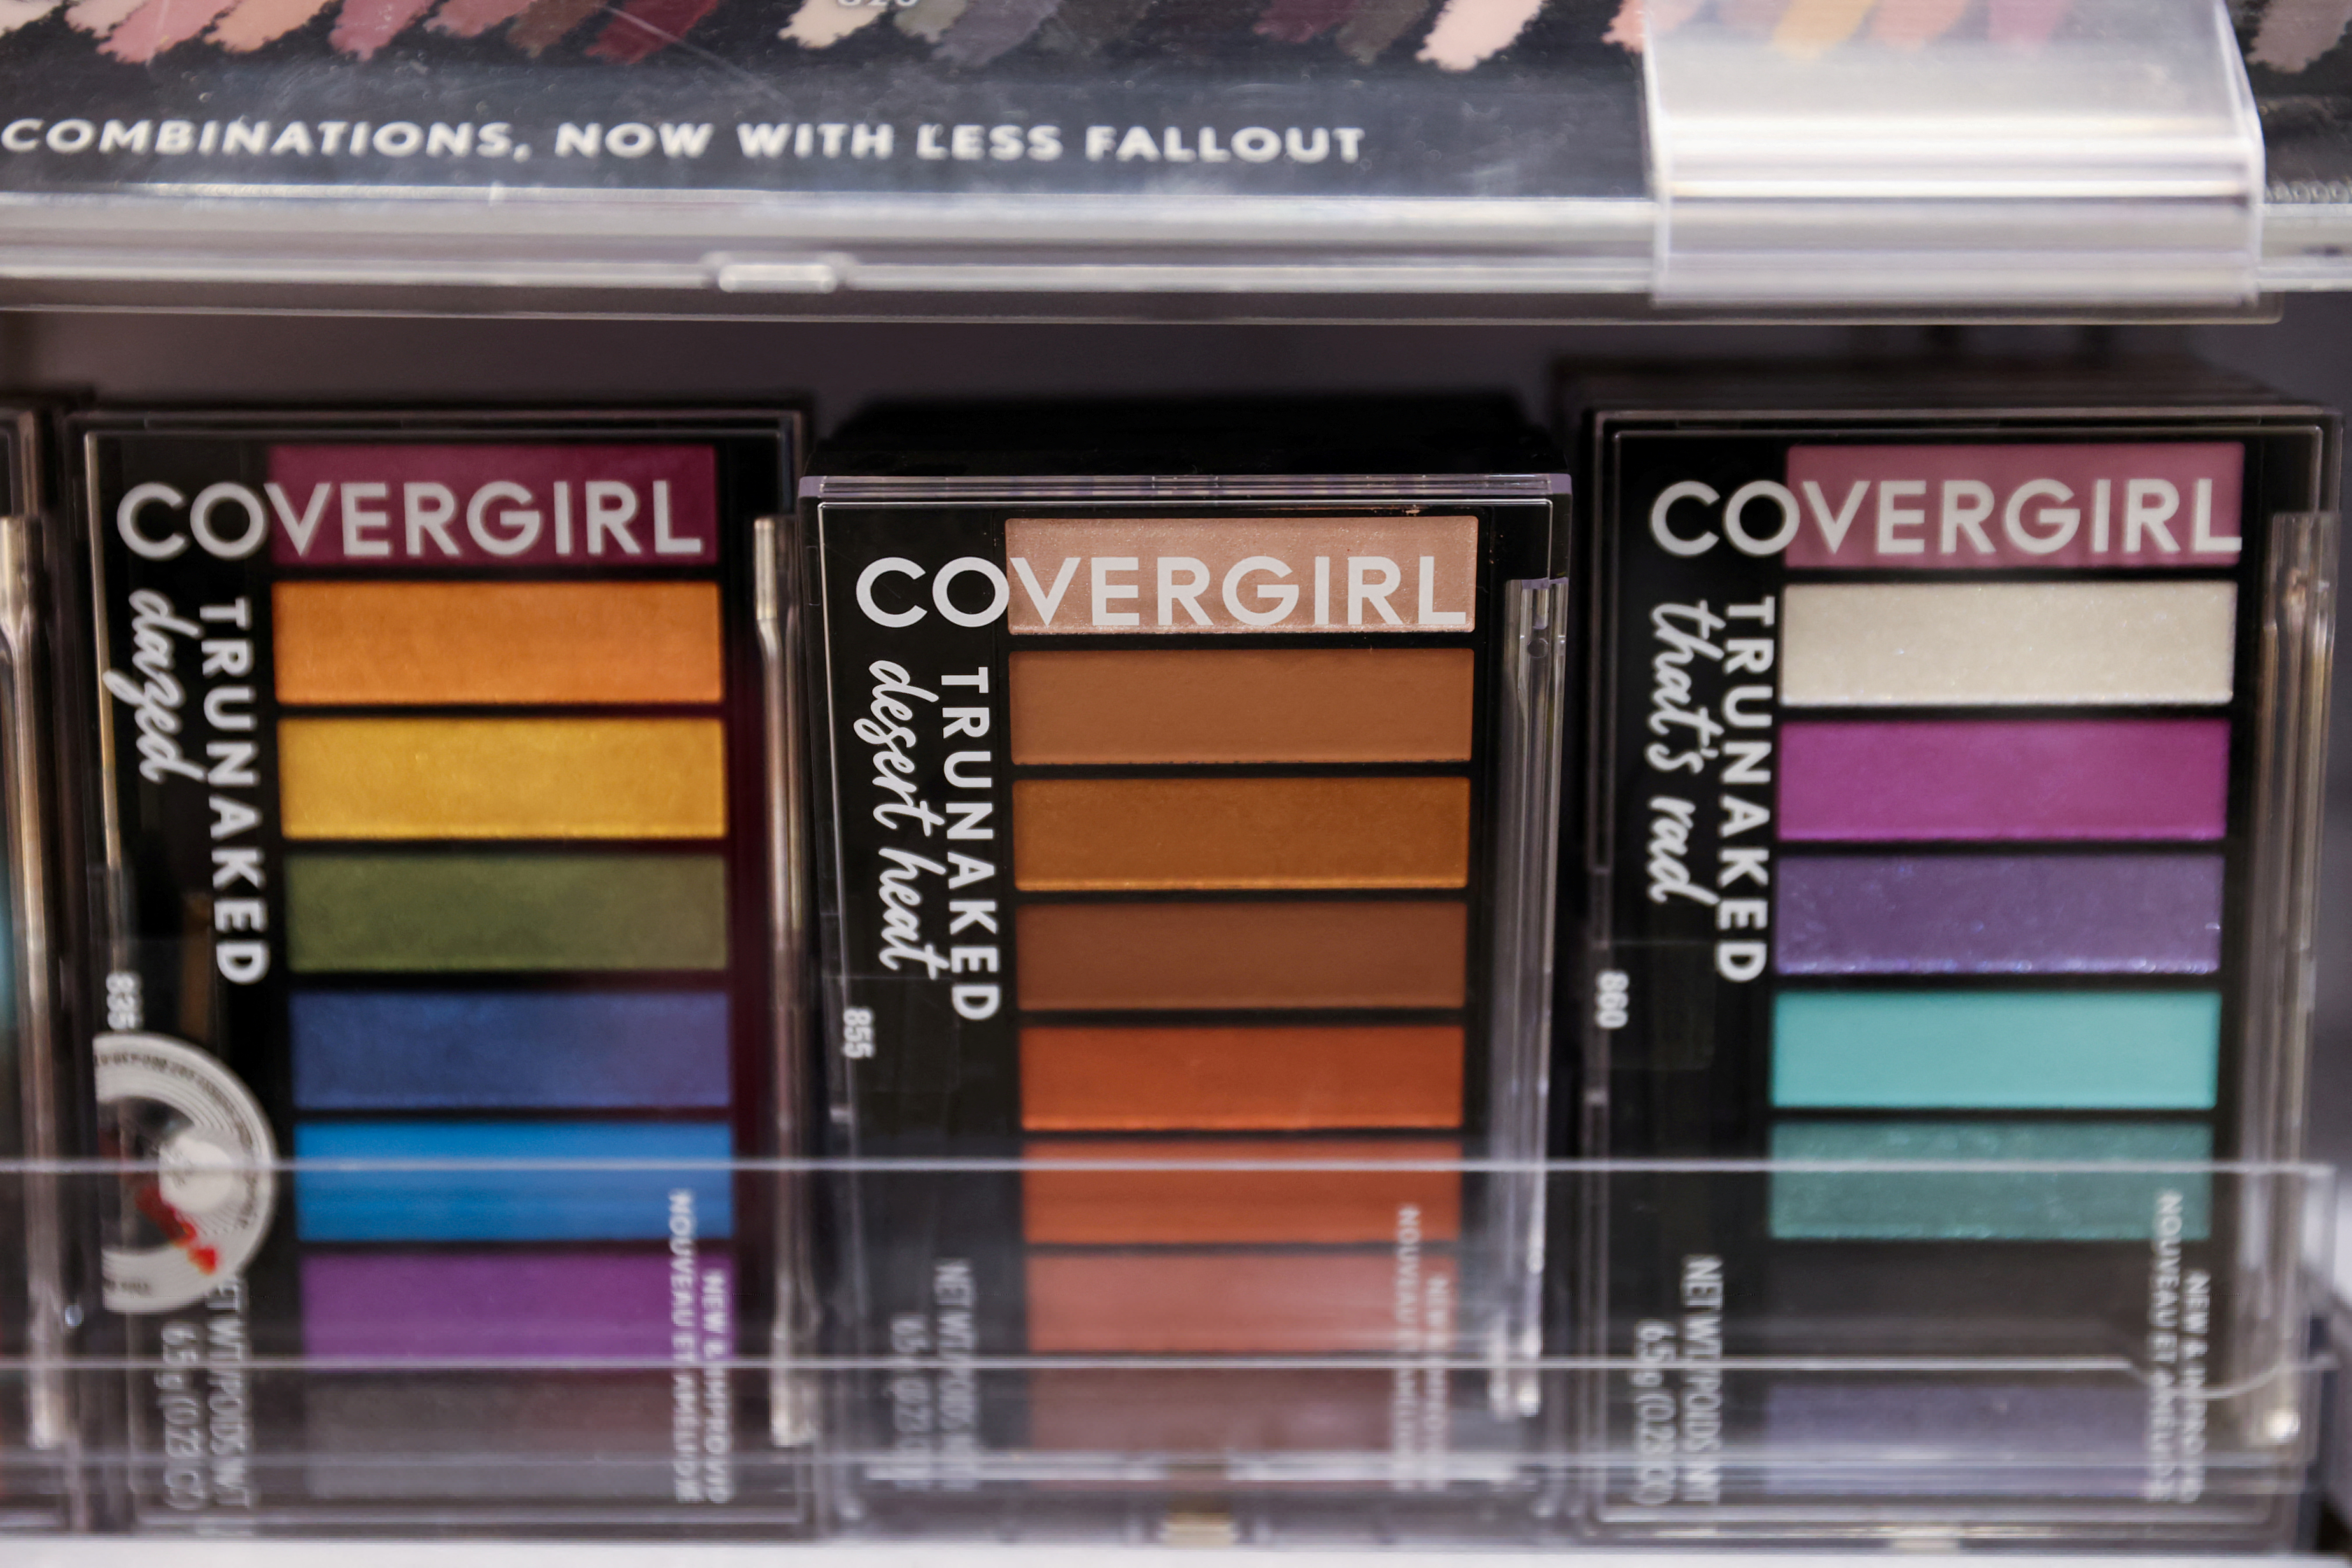 Covergirl makeup, owned by Coty Inc., is seen for sale in Manhattan, New York City